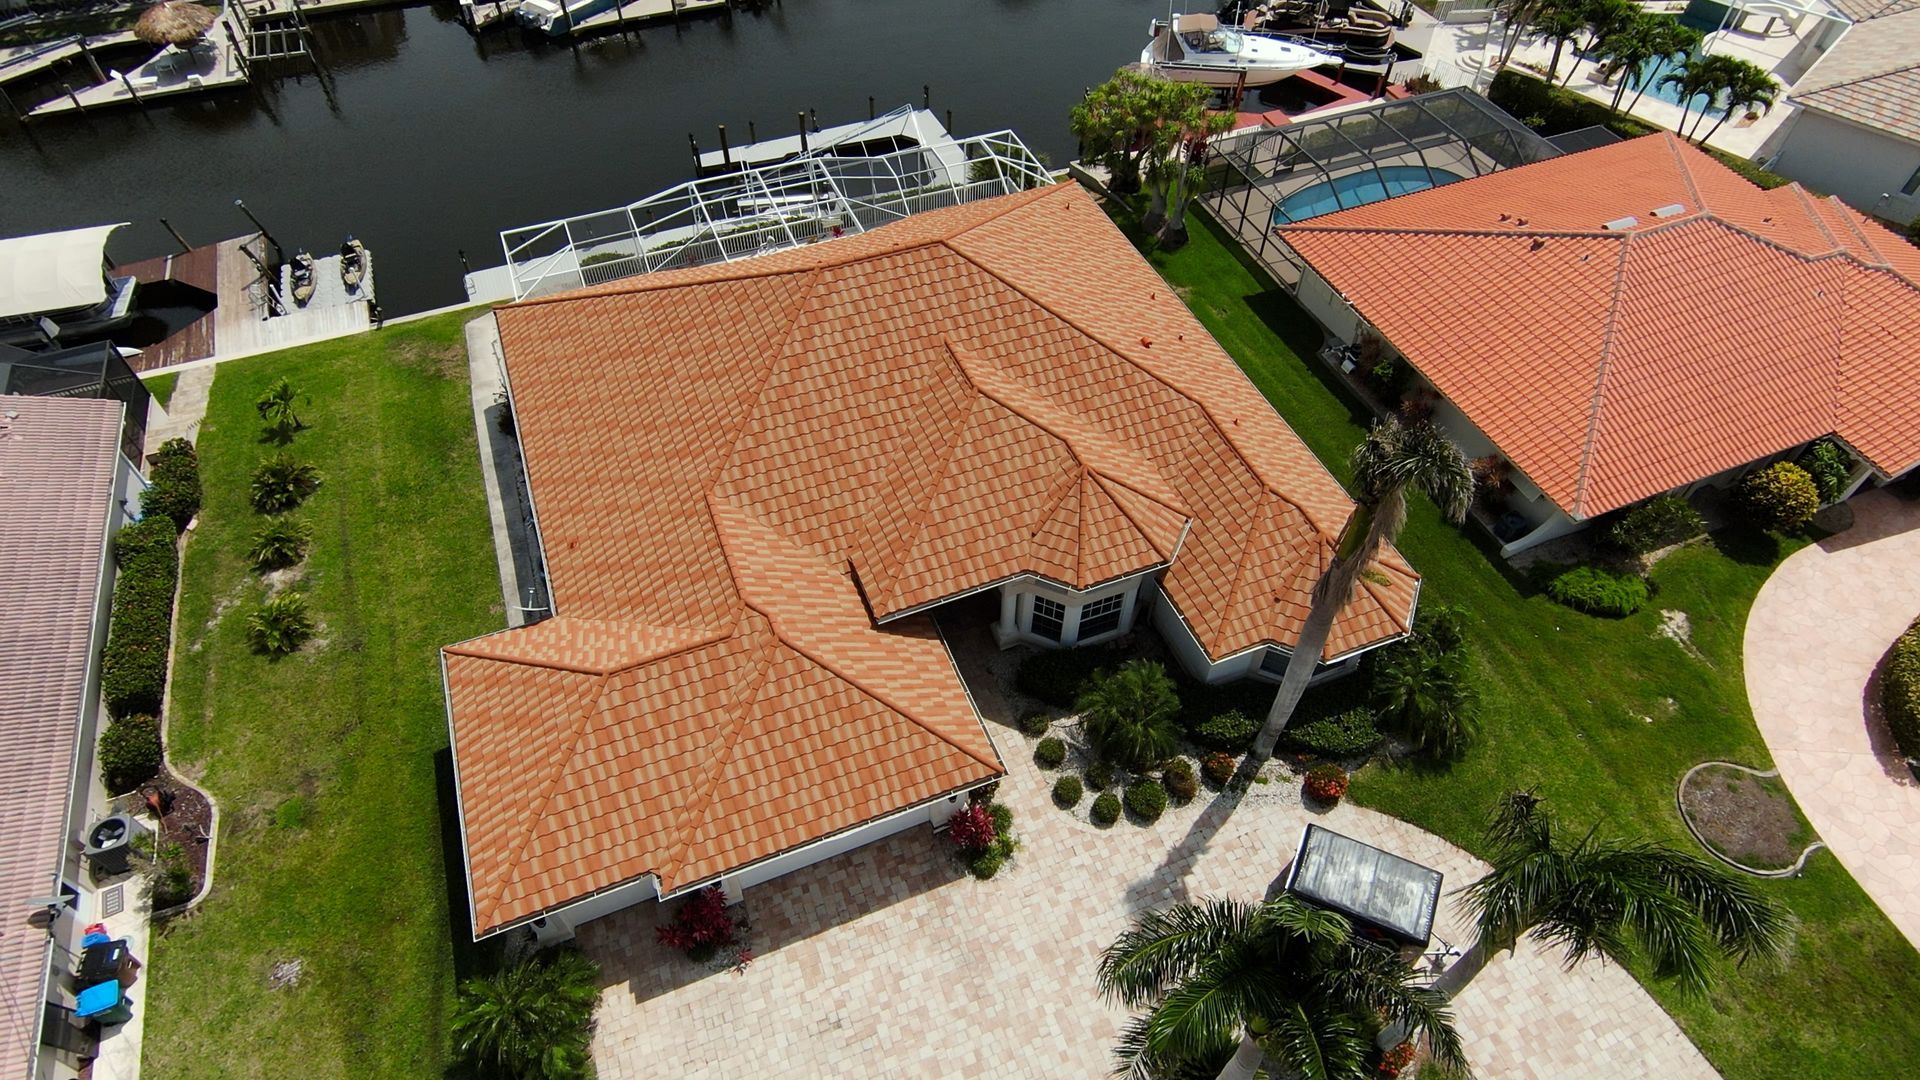 New Roof in Cape Coral by Four Peaks Roofing